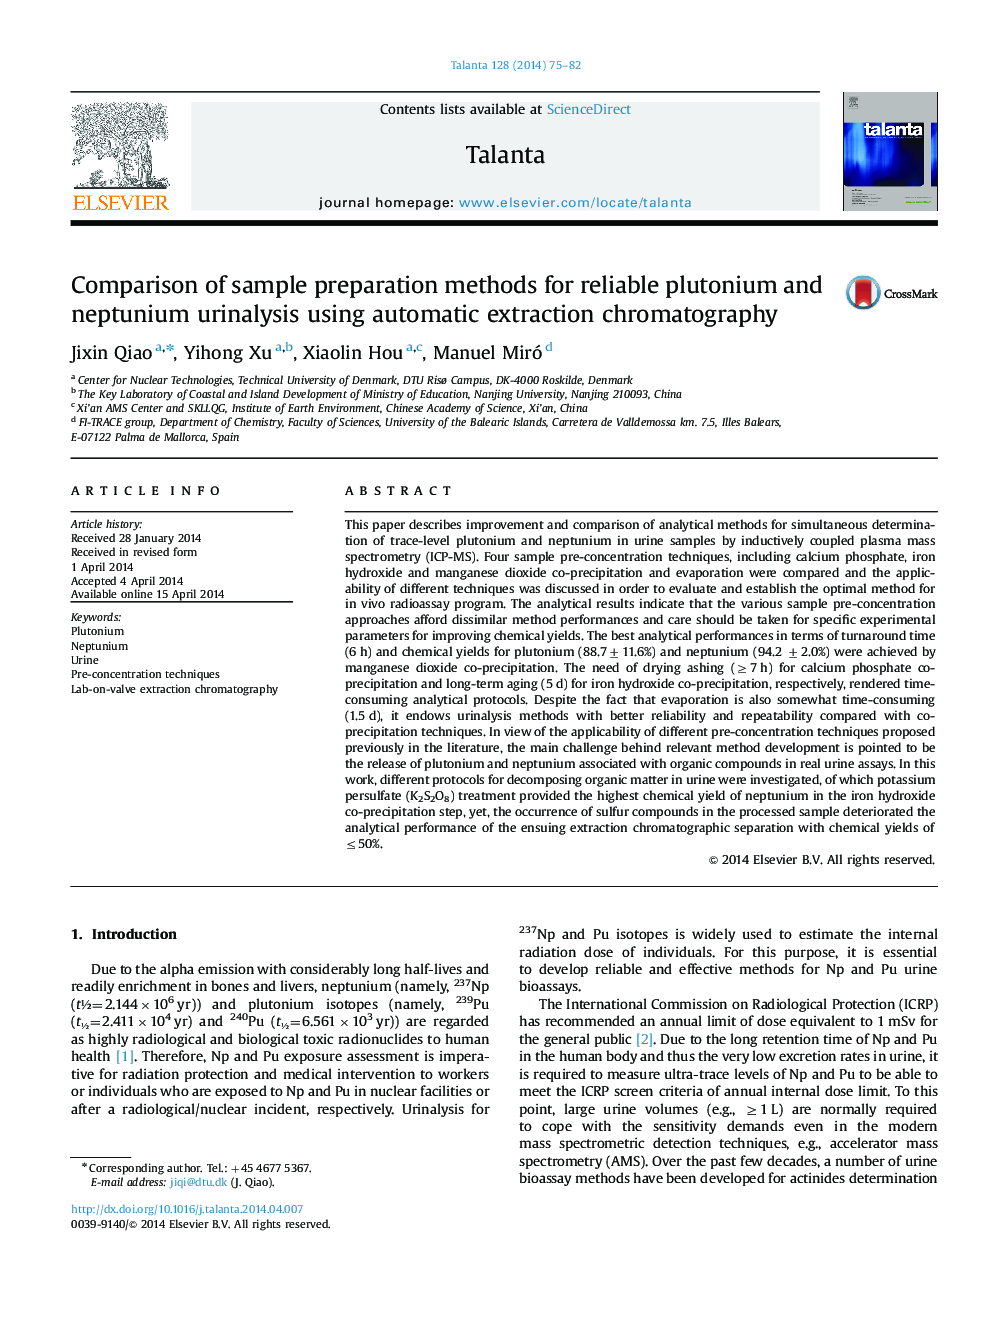 Comparison of sample preparation methods for reliable plutonium and neptunium urinalysis using automatic extraction chromatography